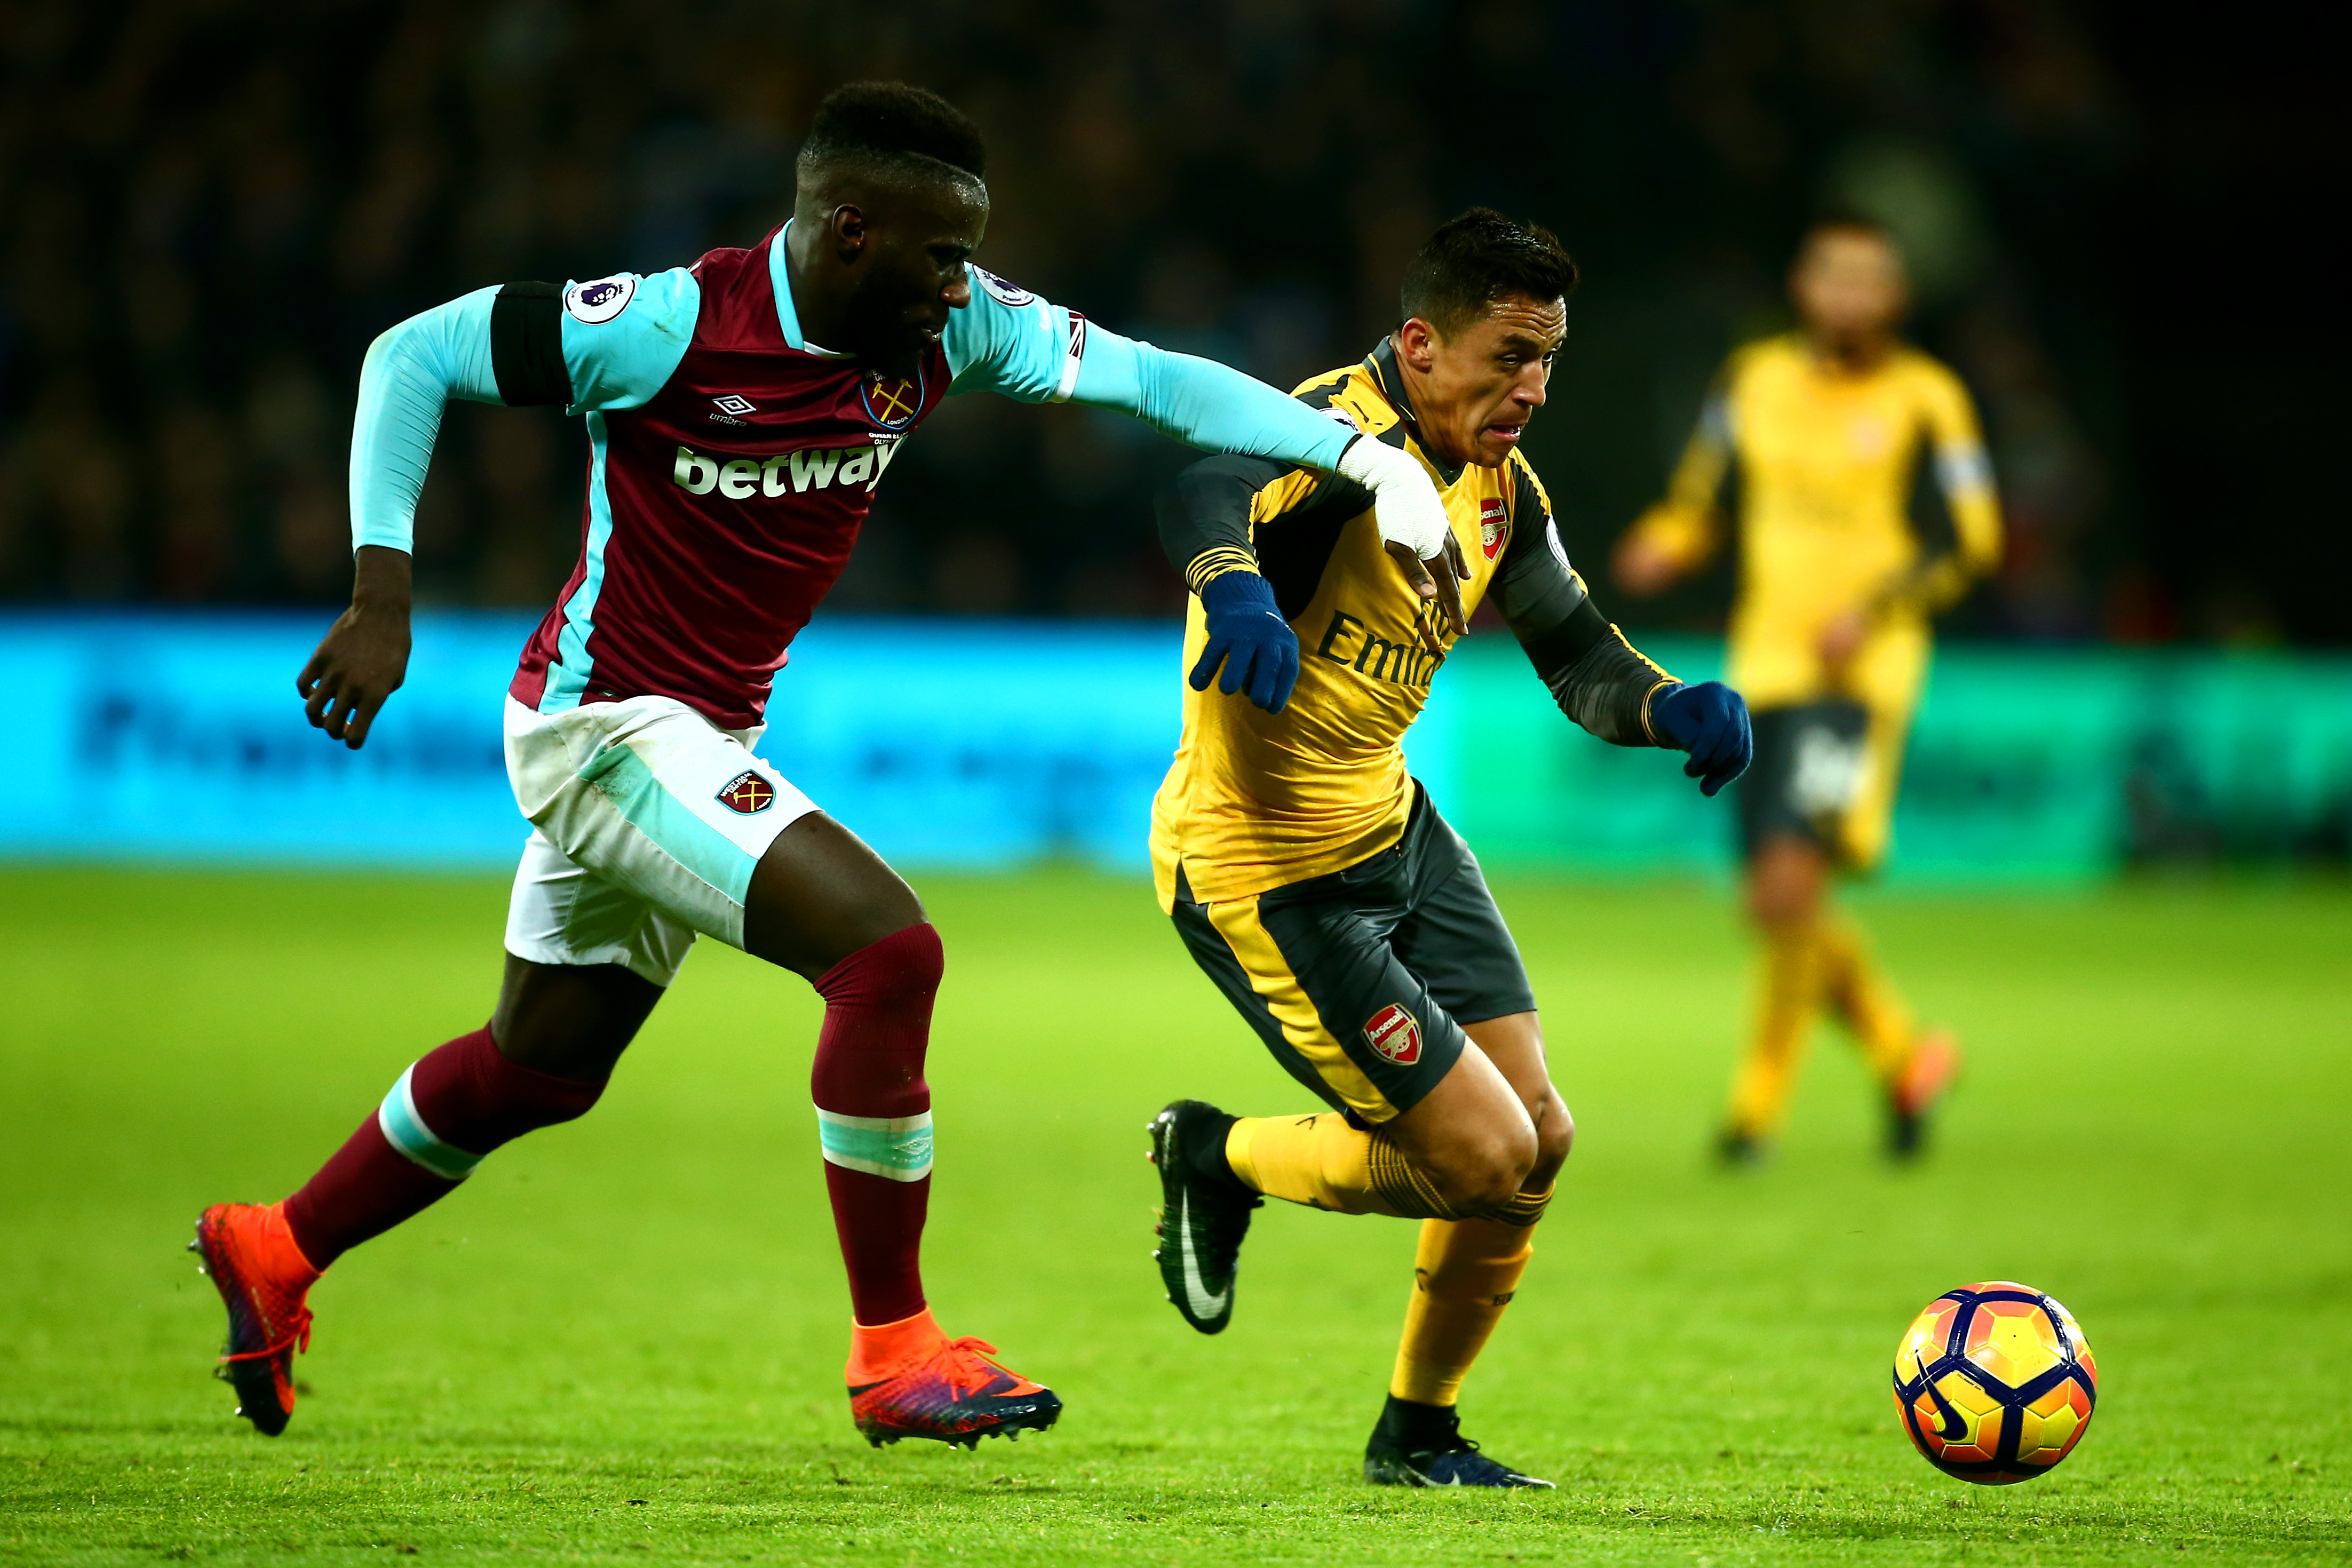 LONDON, ENGLAND - DECEMBER 03:  Alexis Sanchez of Arsenal holds off Arthur Masuaku of West Ham United during the Premier League match between West Ham United and Arsenal at London Stadium on December 3, 2016 in London, England.  (Photo by Jordan Mansfield/Getty Images)